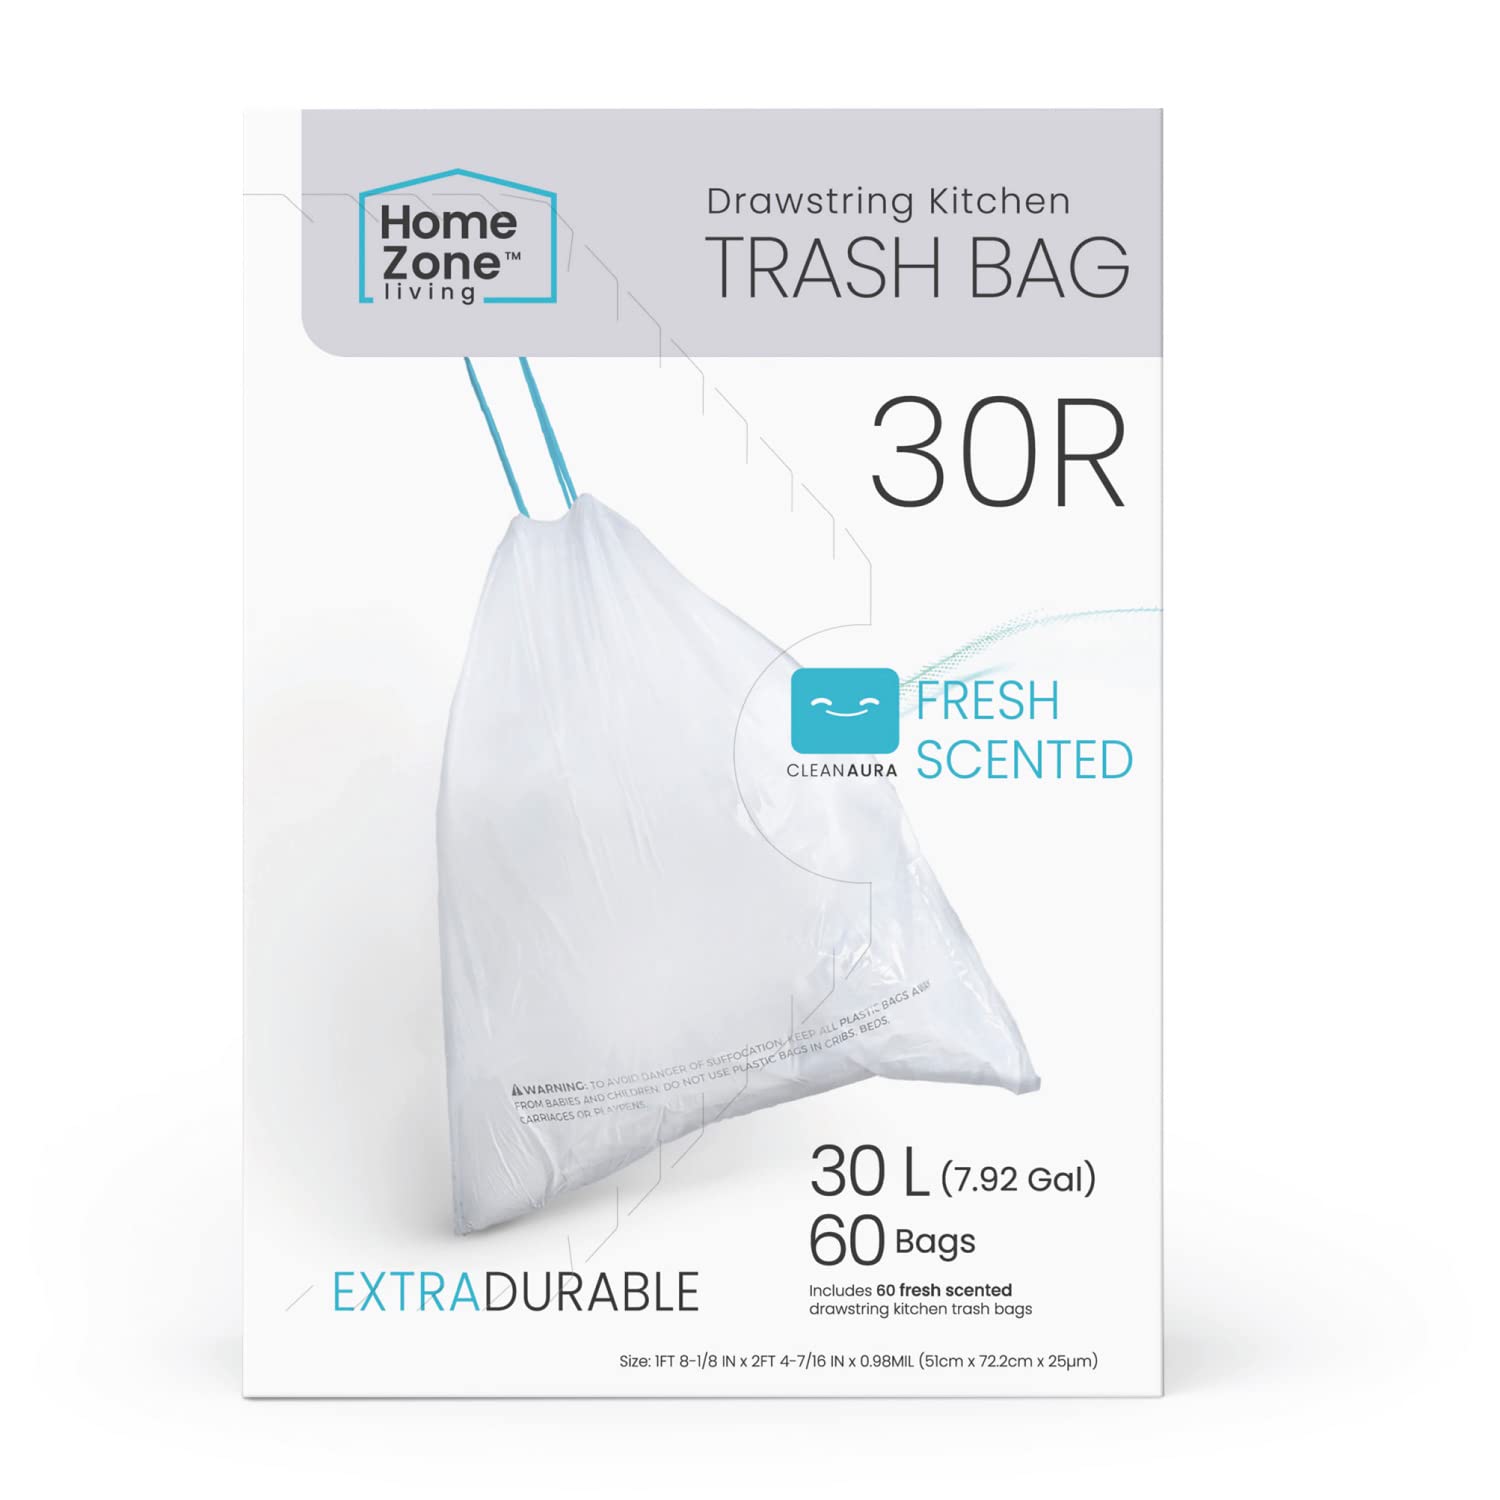 Home Zone Living 8 Gallon Kitchen Trash Bags with Drawstring Handles, Heavy Duty Custom Fit Design for 30 Liter Dual Recycling Liners, Code 30R, 60 Count